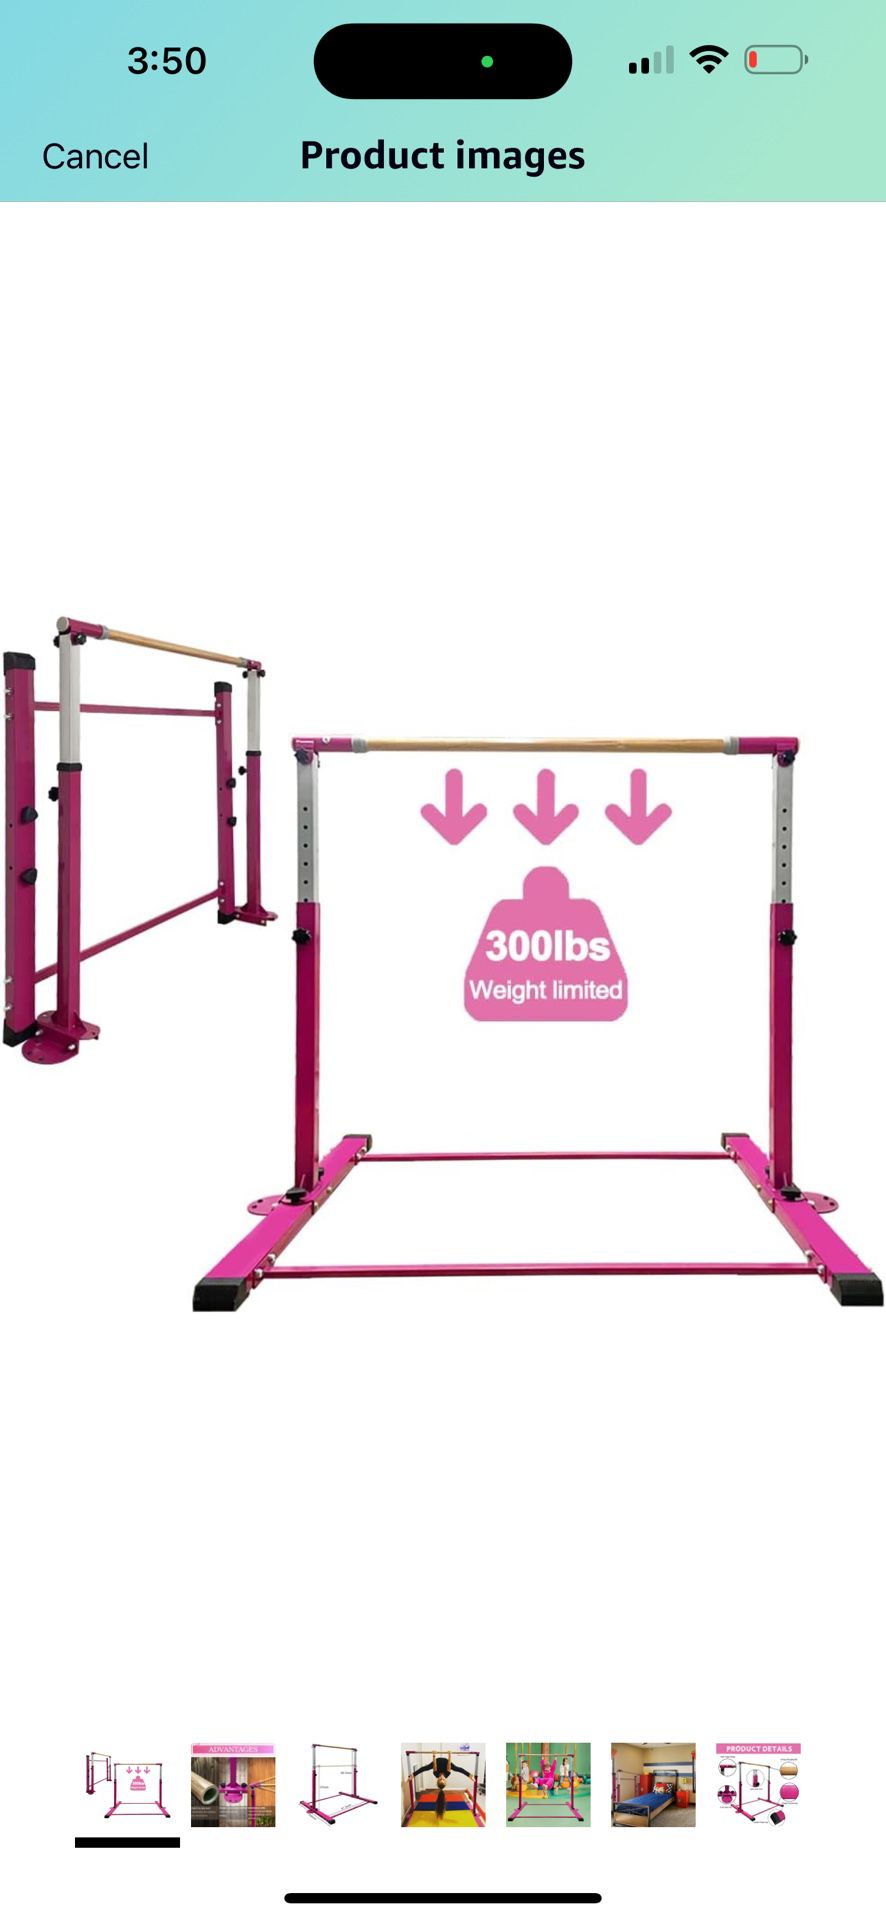 Gymnastic Kip Bar,Kids Girls Junior Ages 3-15,3' to 5' Adjustable Height,Home Gym Equipment,Home Training,1-4 Levels,260lbs Weight Capacity